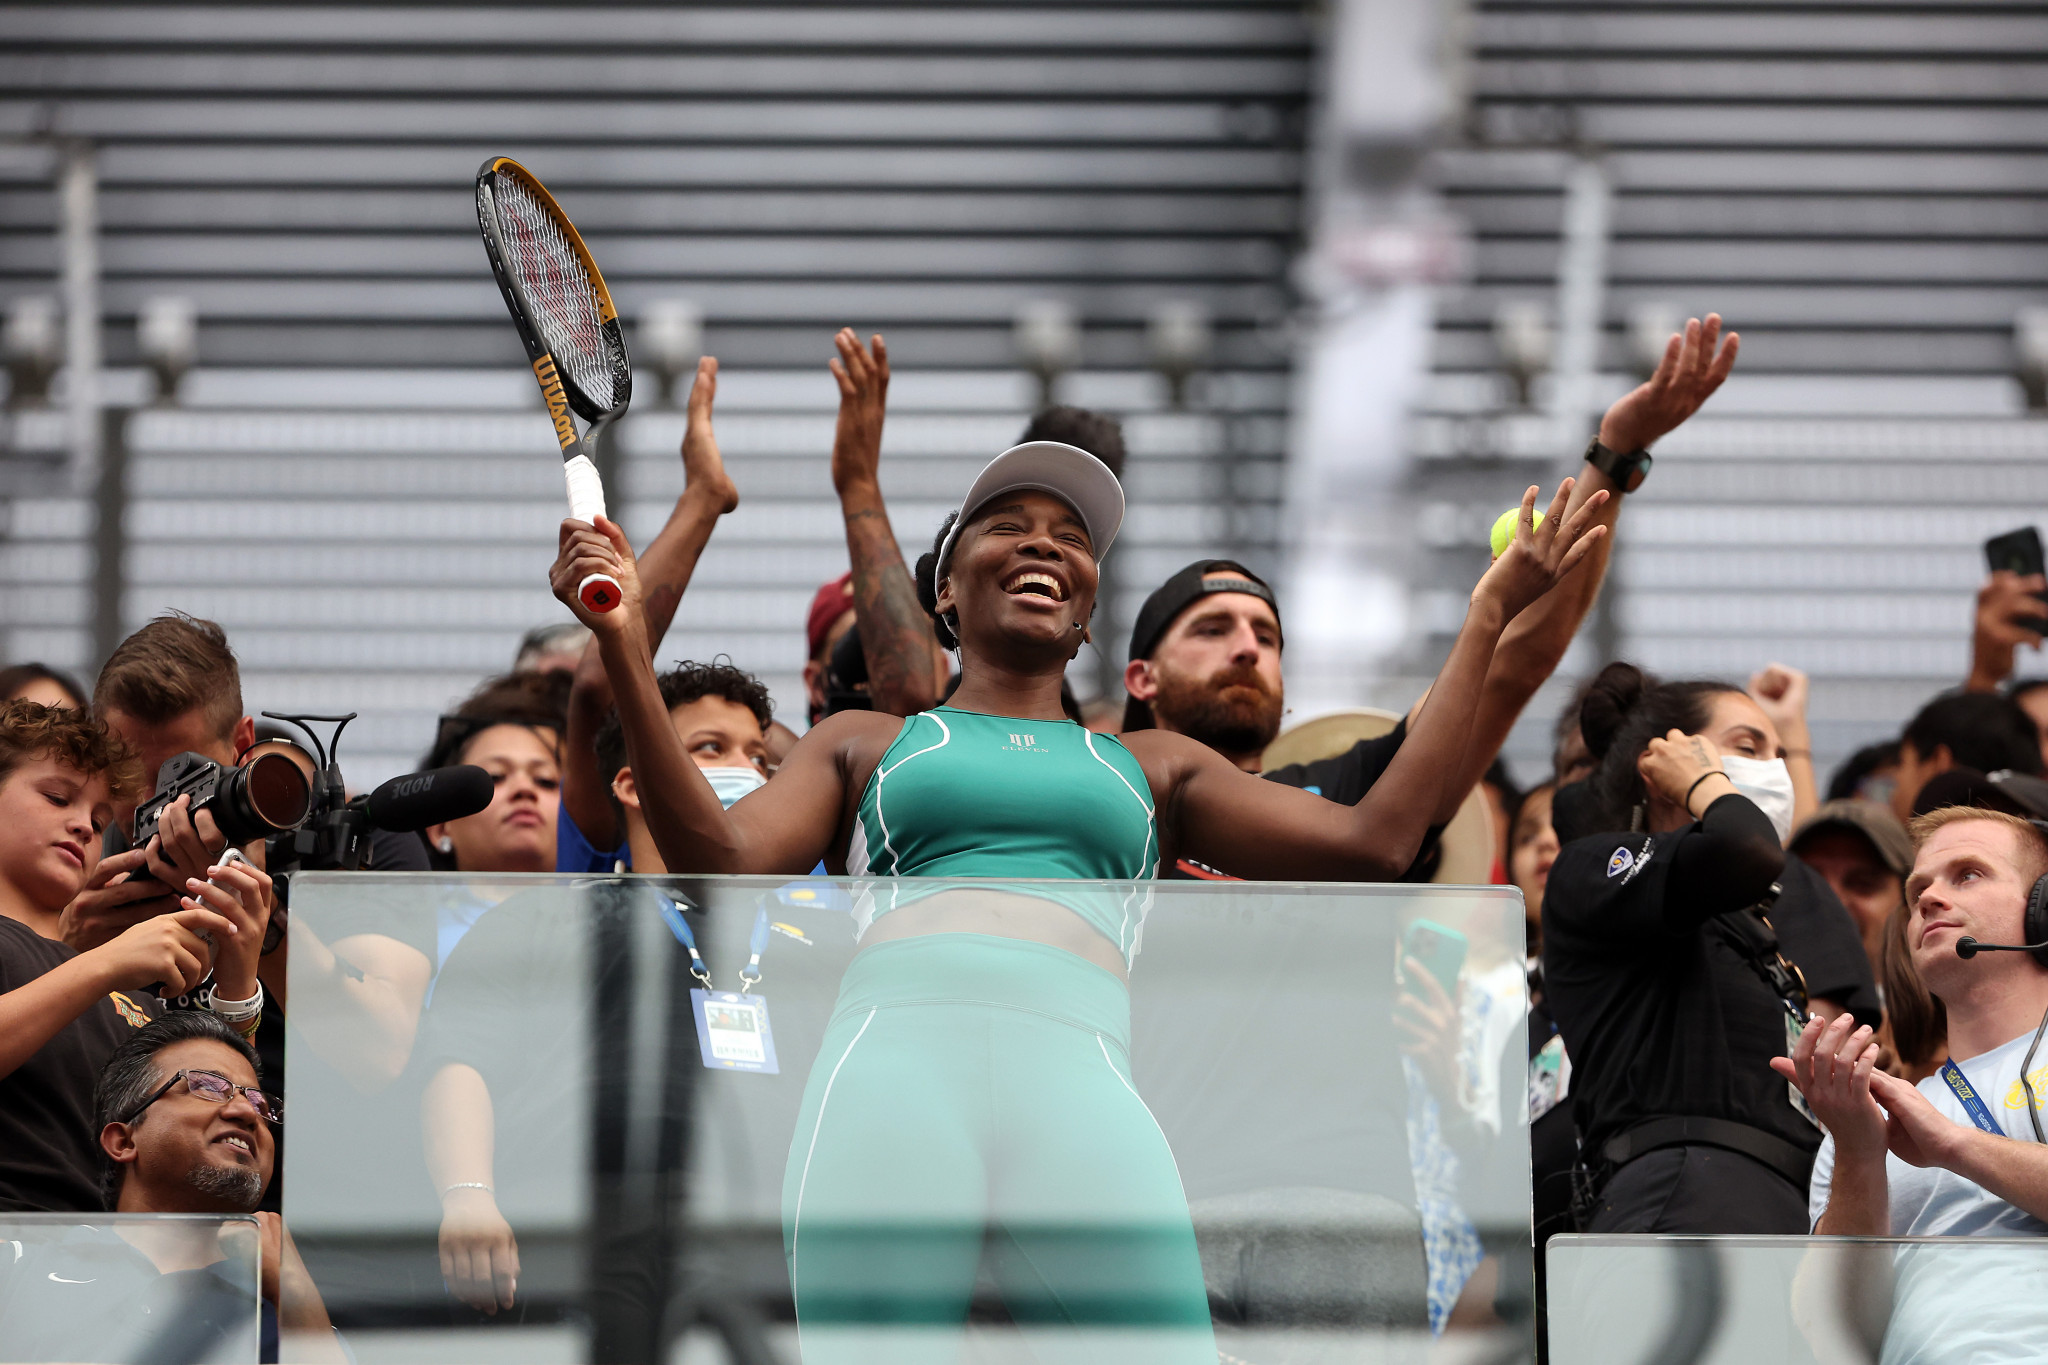 Venus Williams took part in a match as part of Arthur Ashe Kids Day celebration ©Getty Images